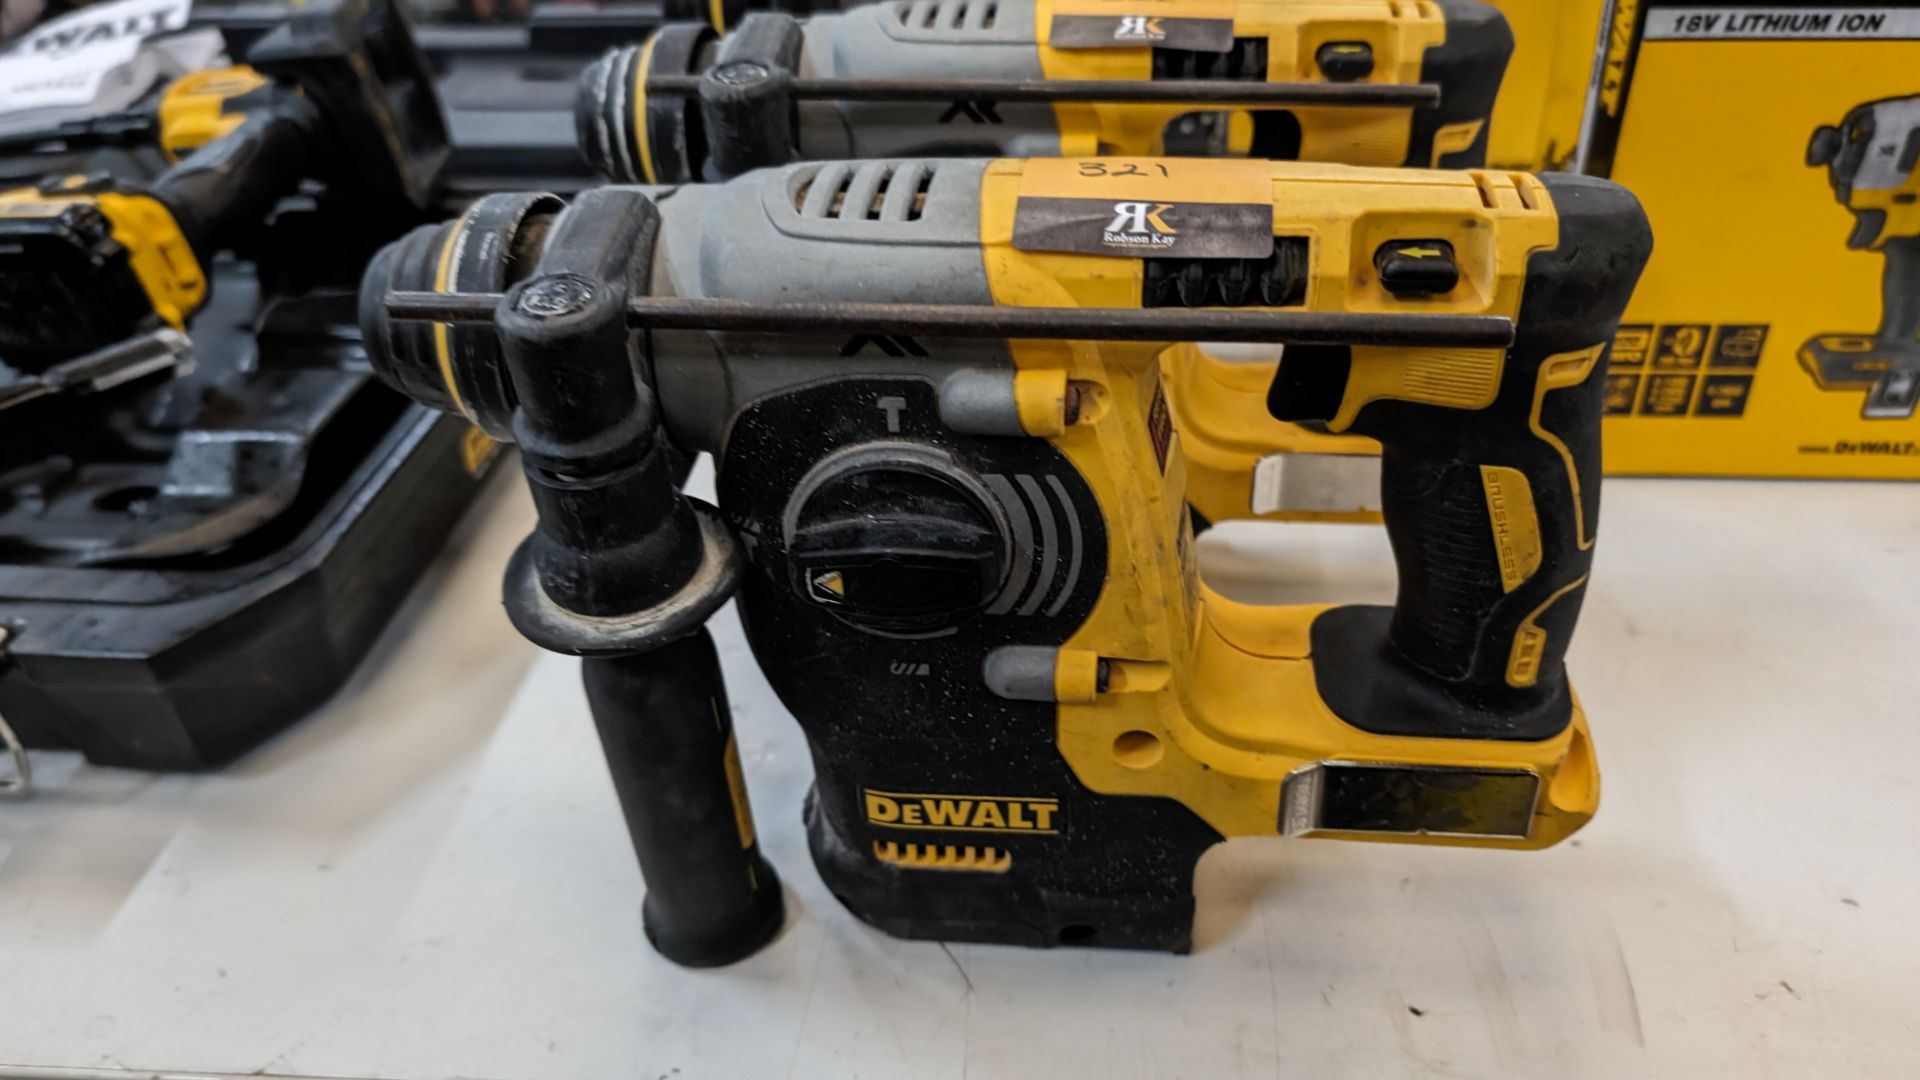 DeWalt model DCH273 cordless impact driver - no battery with this lot - Image 2 of 6